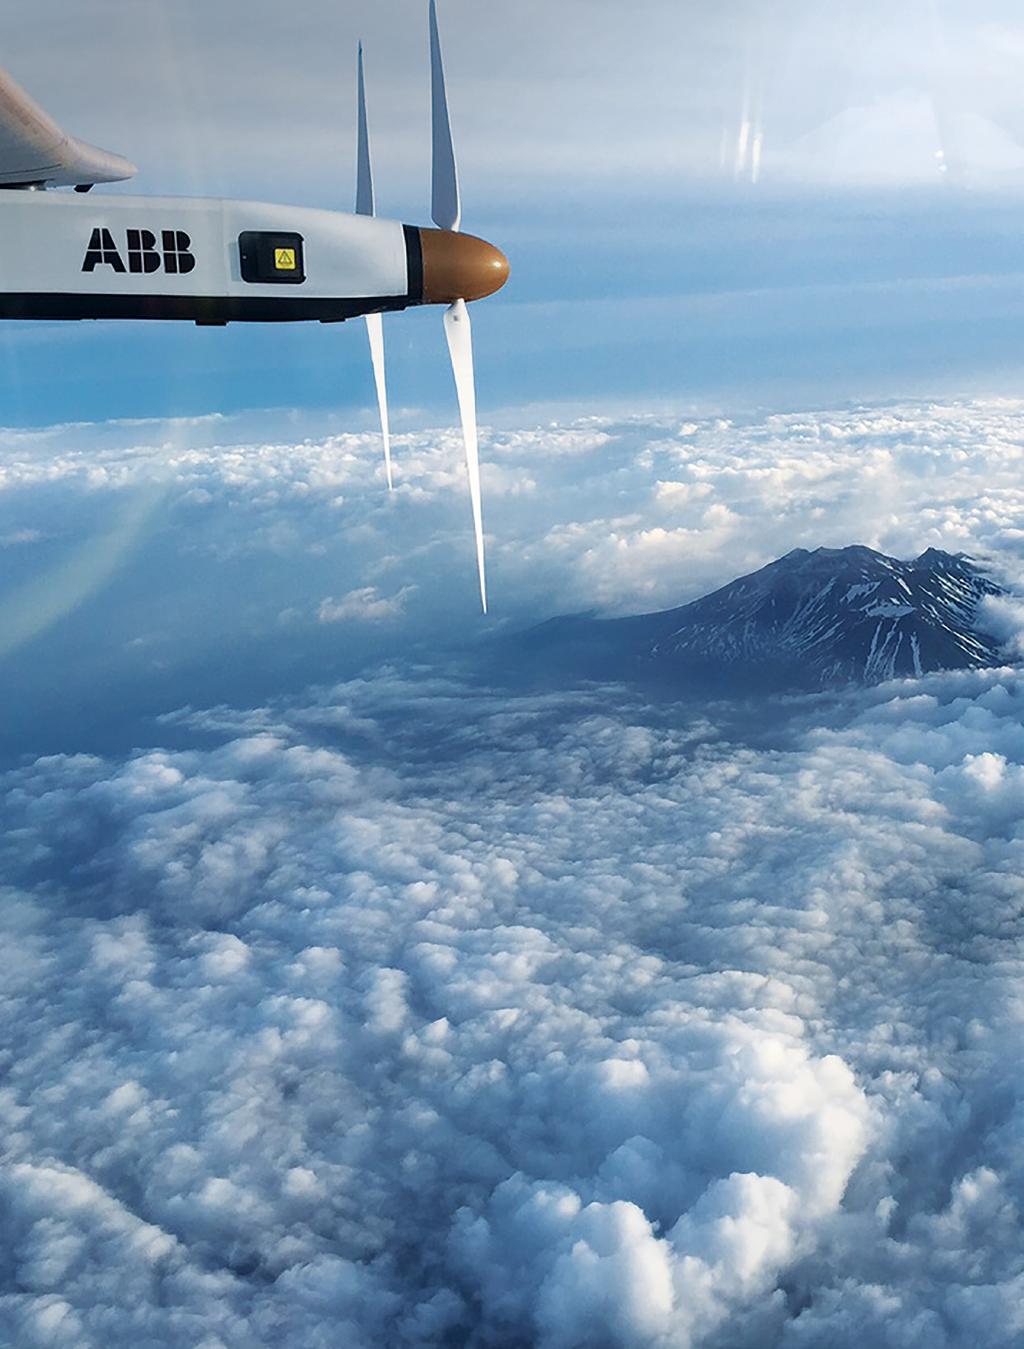 FEATURE // AROUND THE WORLD BY STEM AN INTERVIEW WITH A MISSION ENGINEER AT SOLAR IMPULSE SOLAR